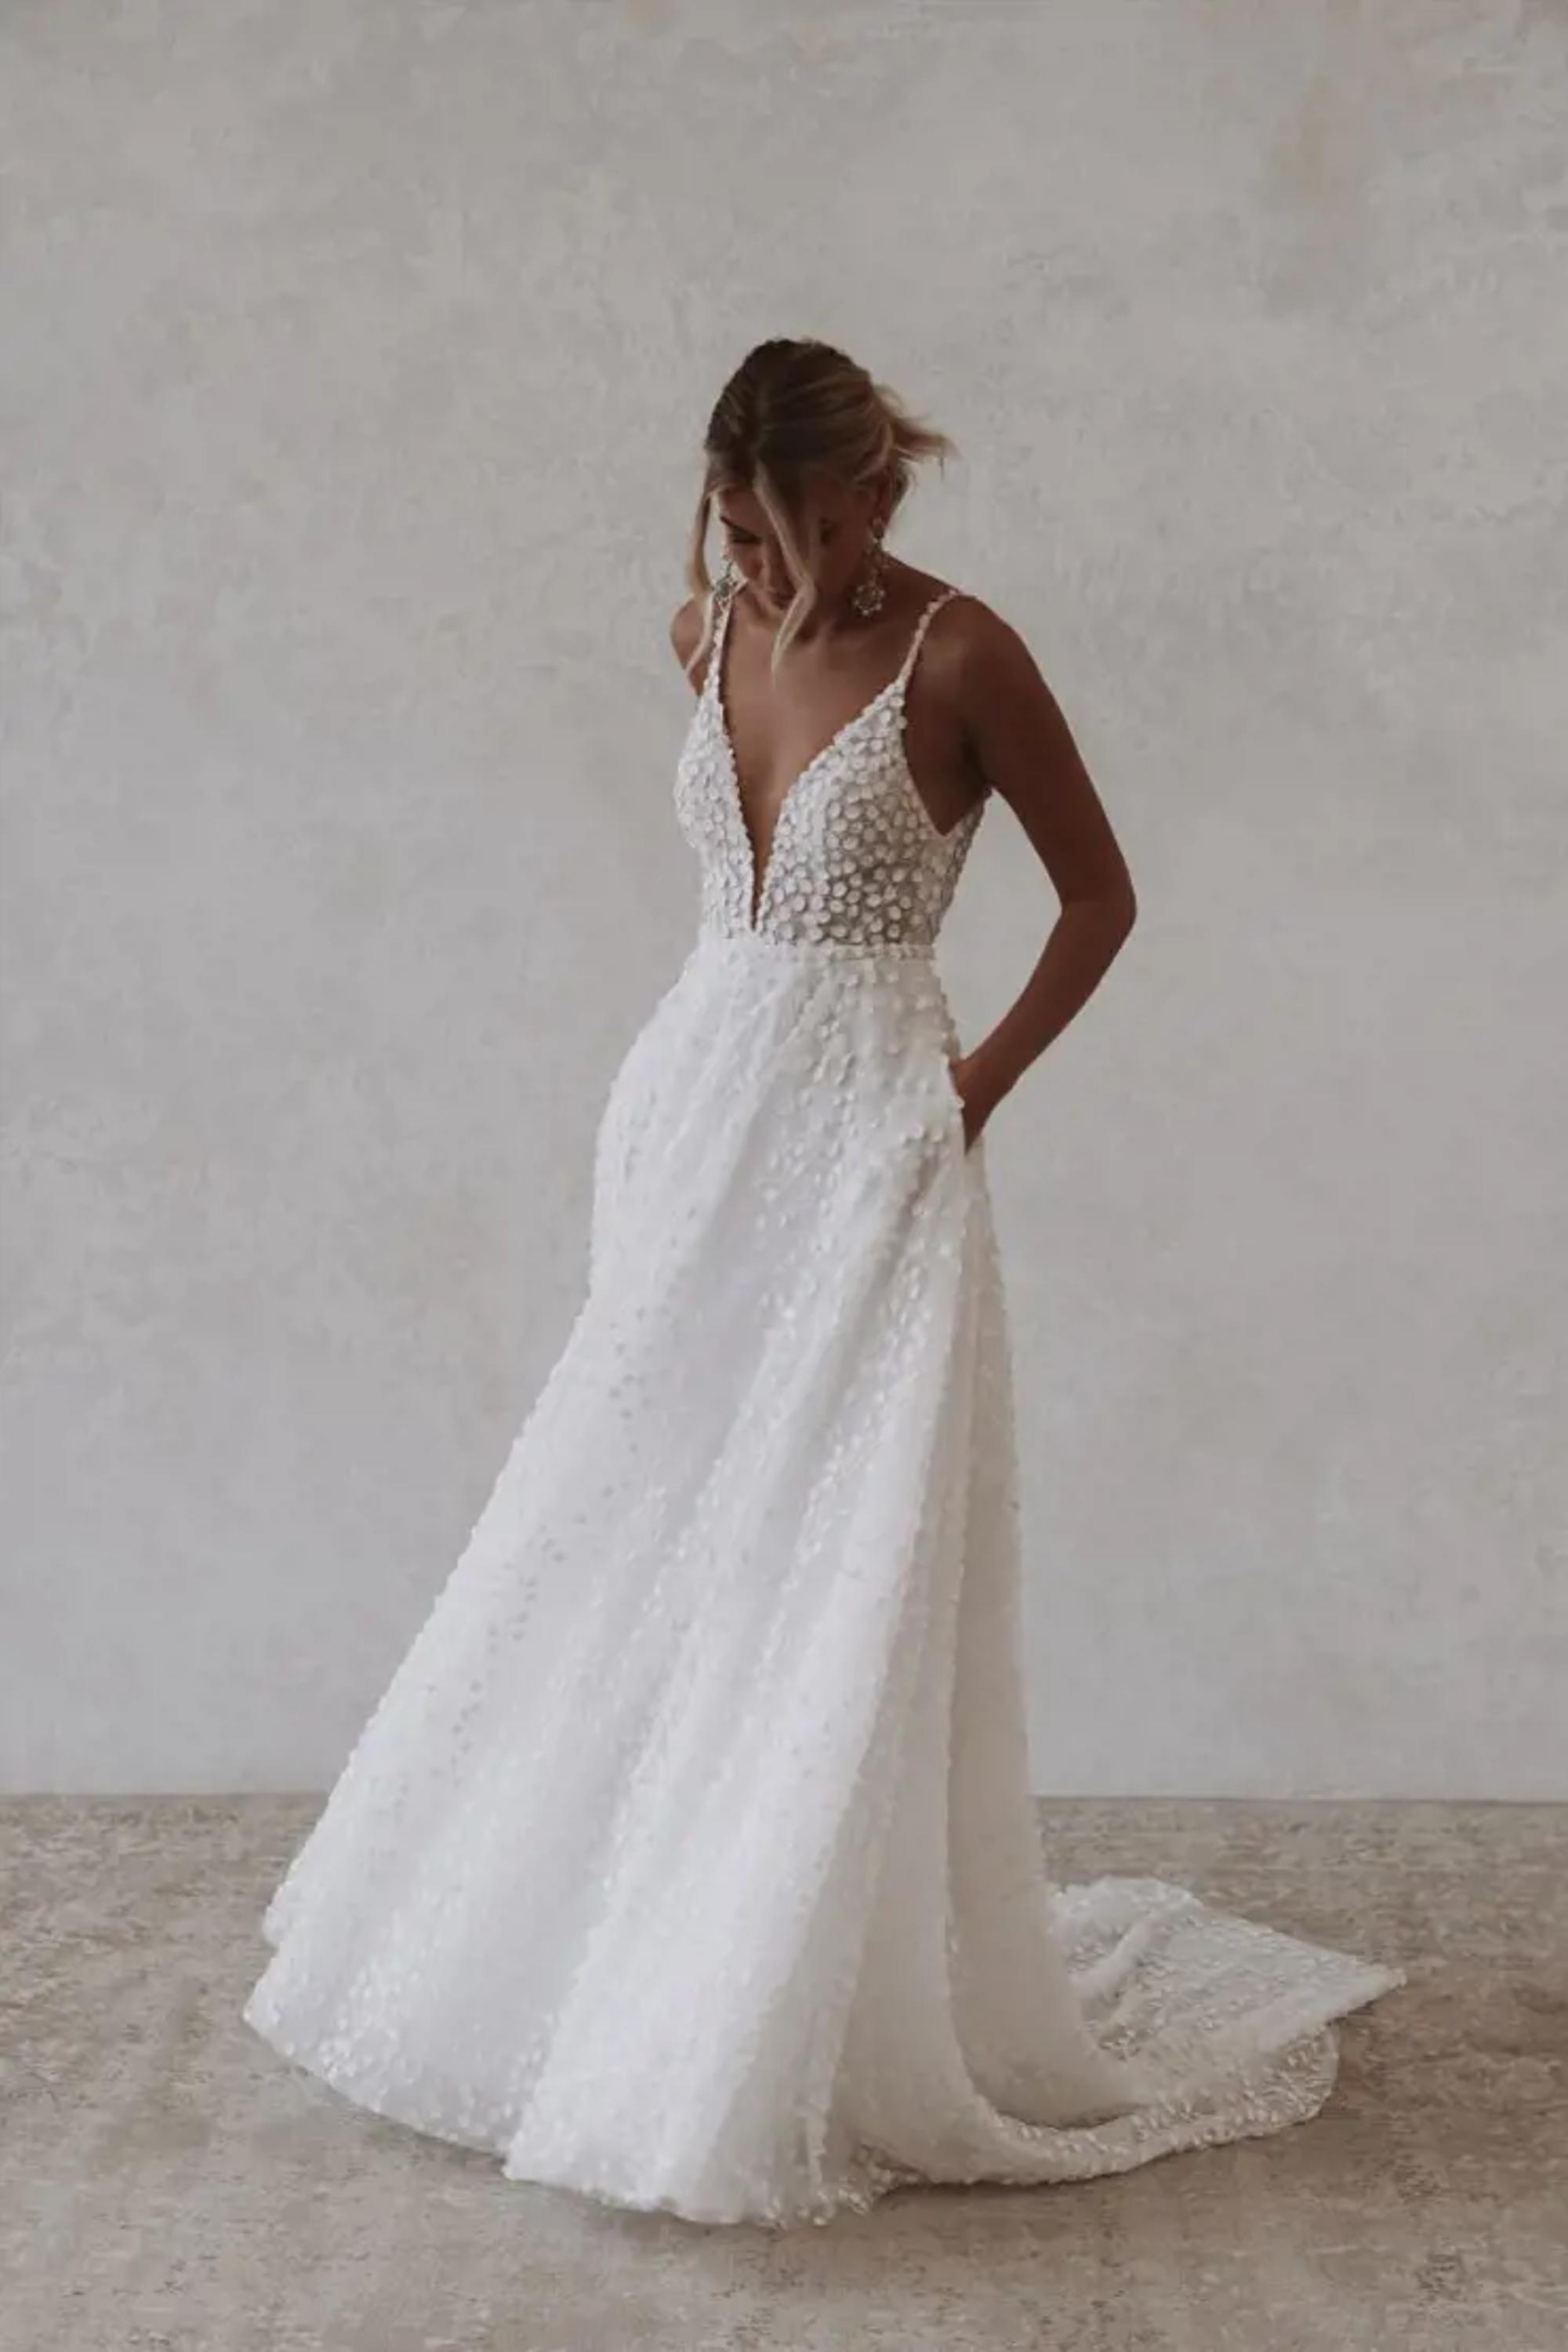 LENNI FLOWY : Made With Love, Unique Bridal